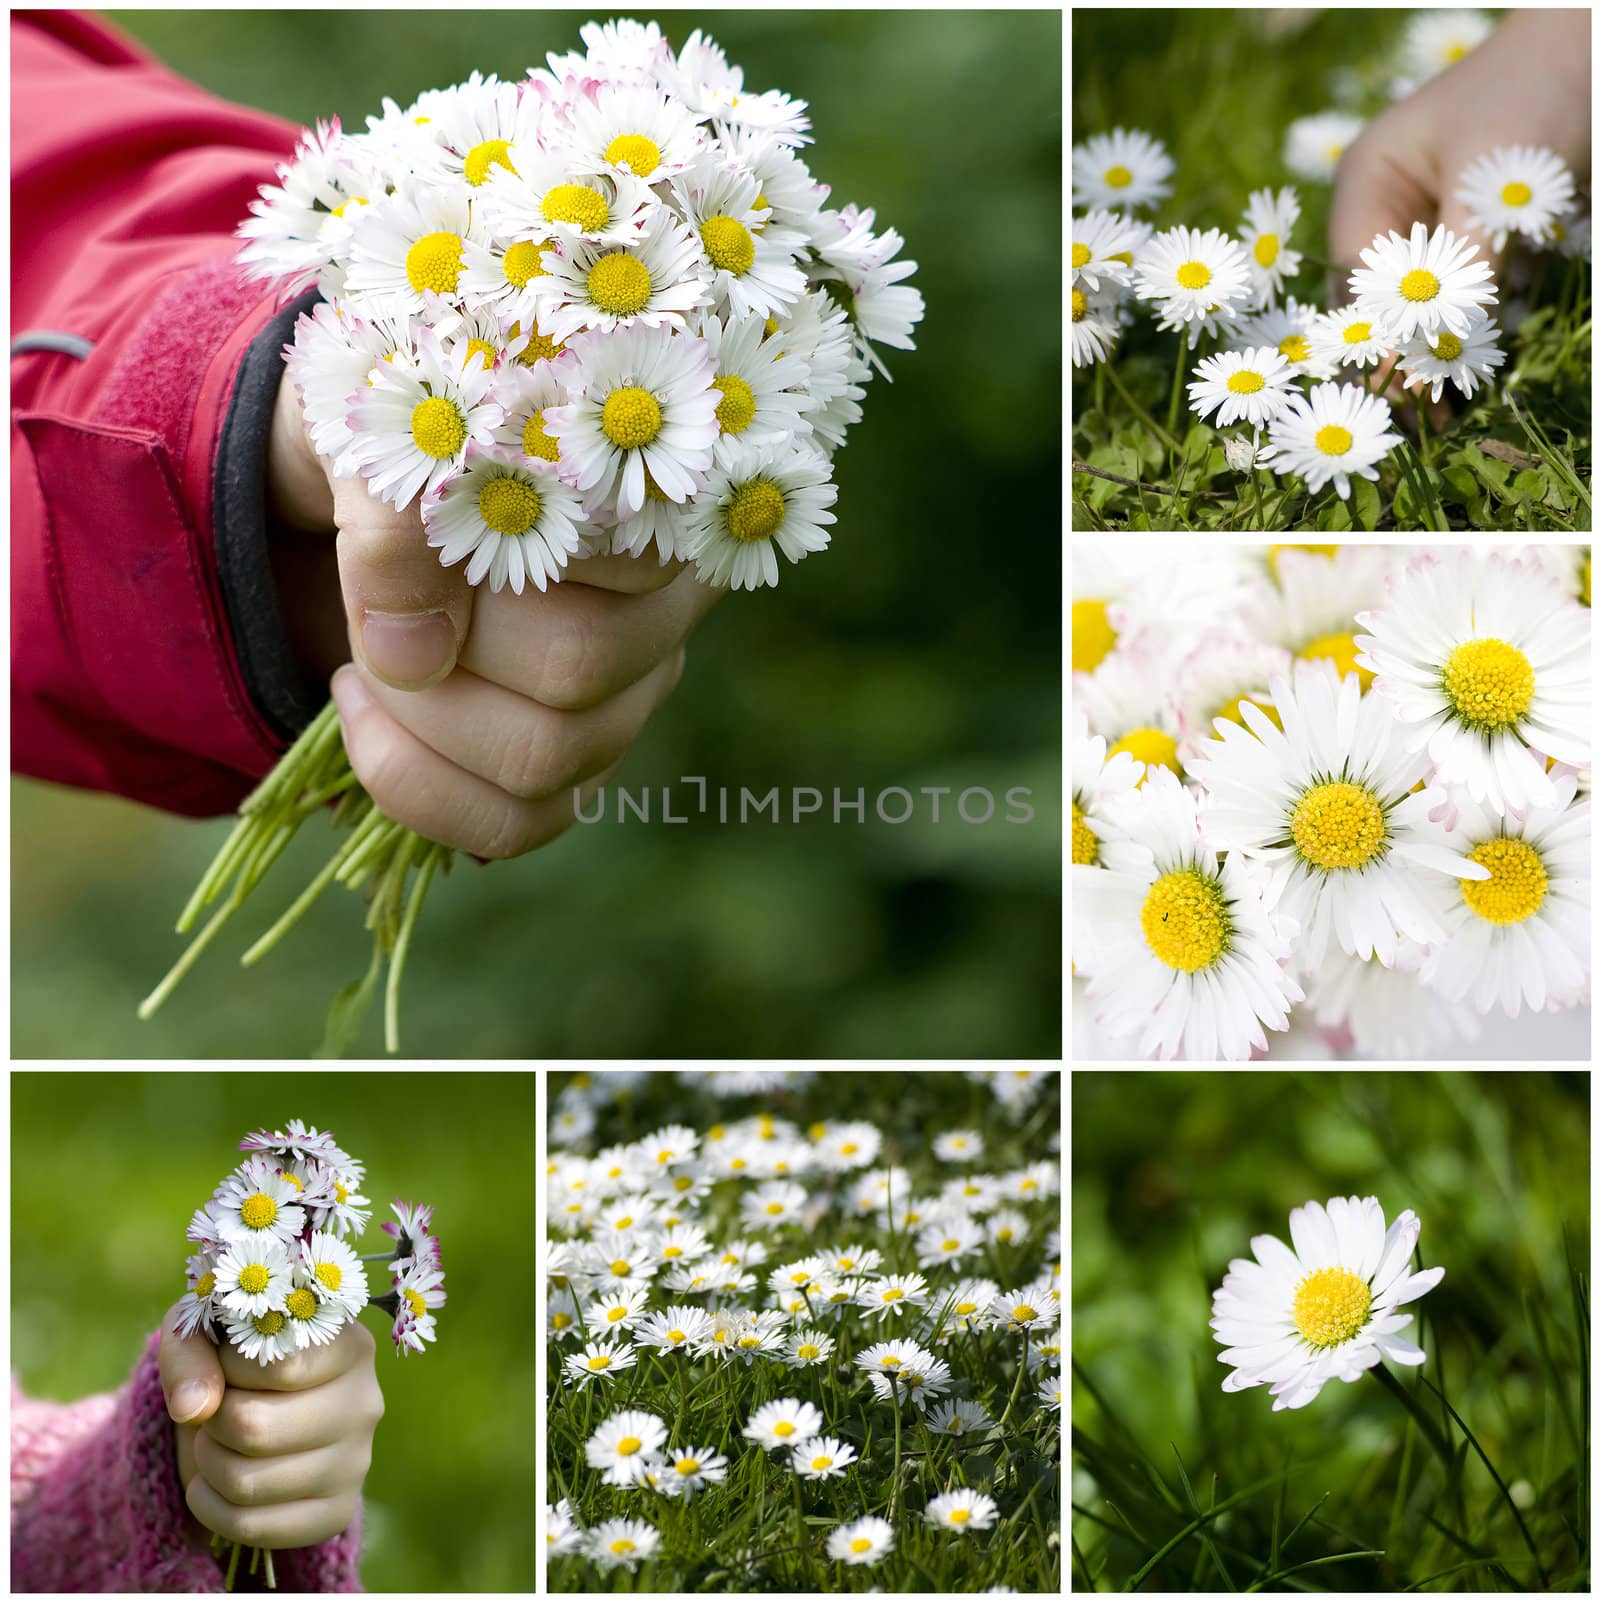 Collection of daisies - spring collage by miradrozdowski